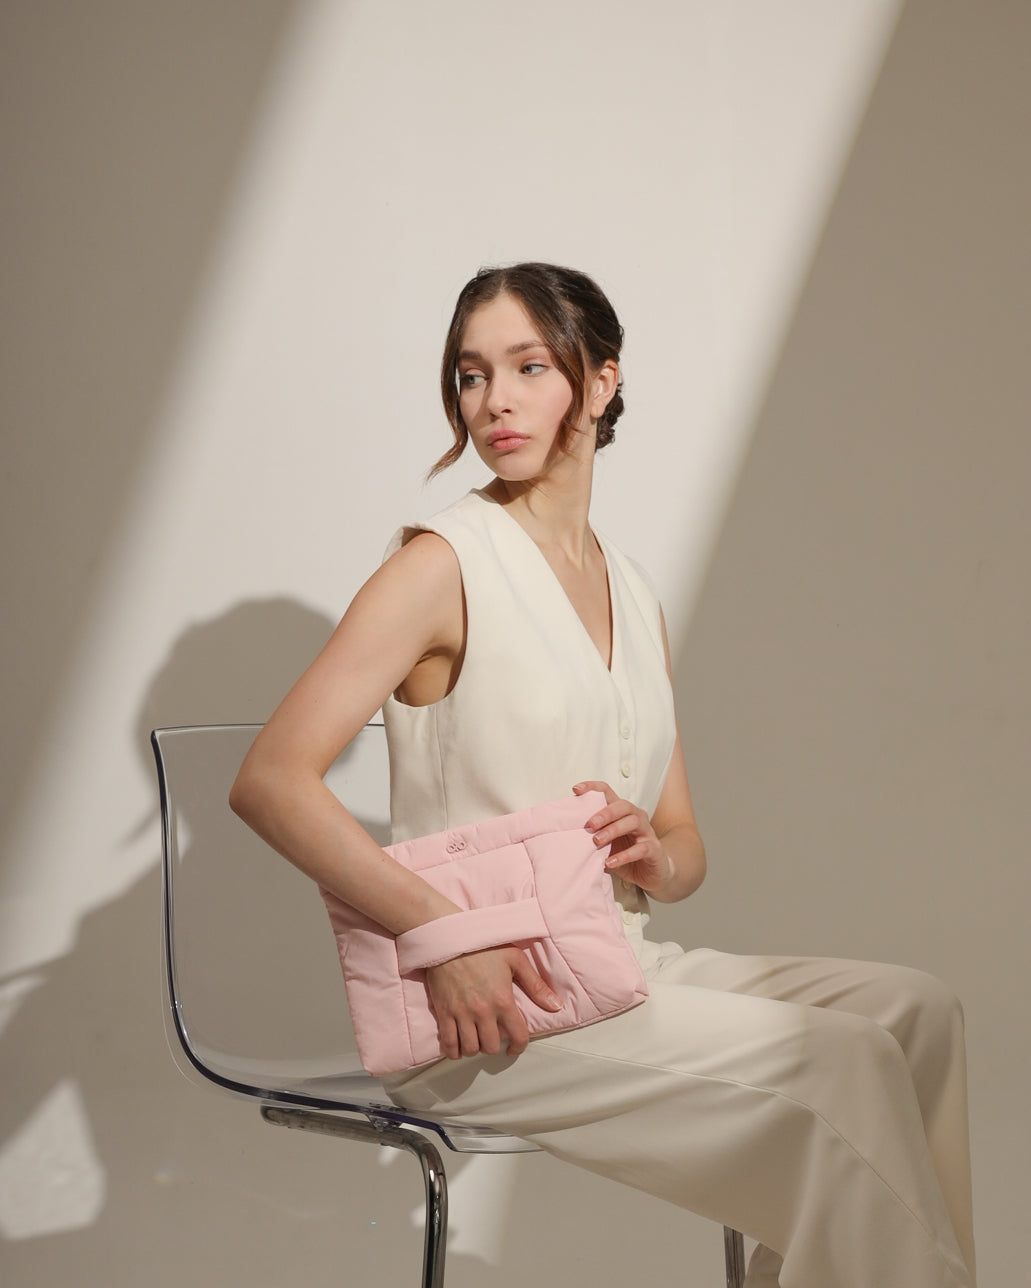 COSY PUFFY CLUTCH BAG IN PEONY